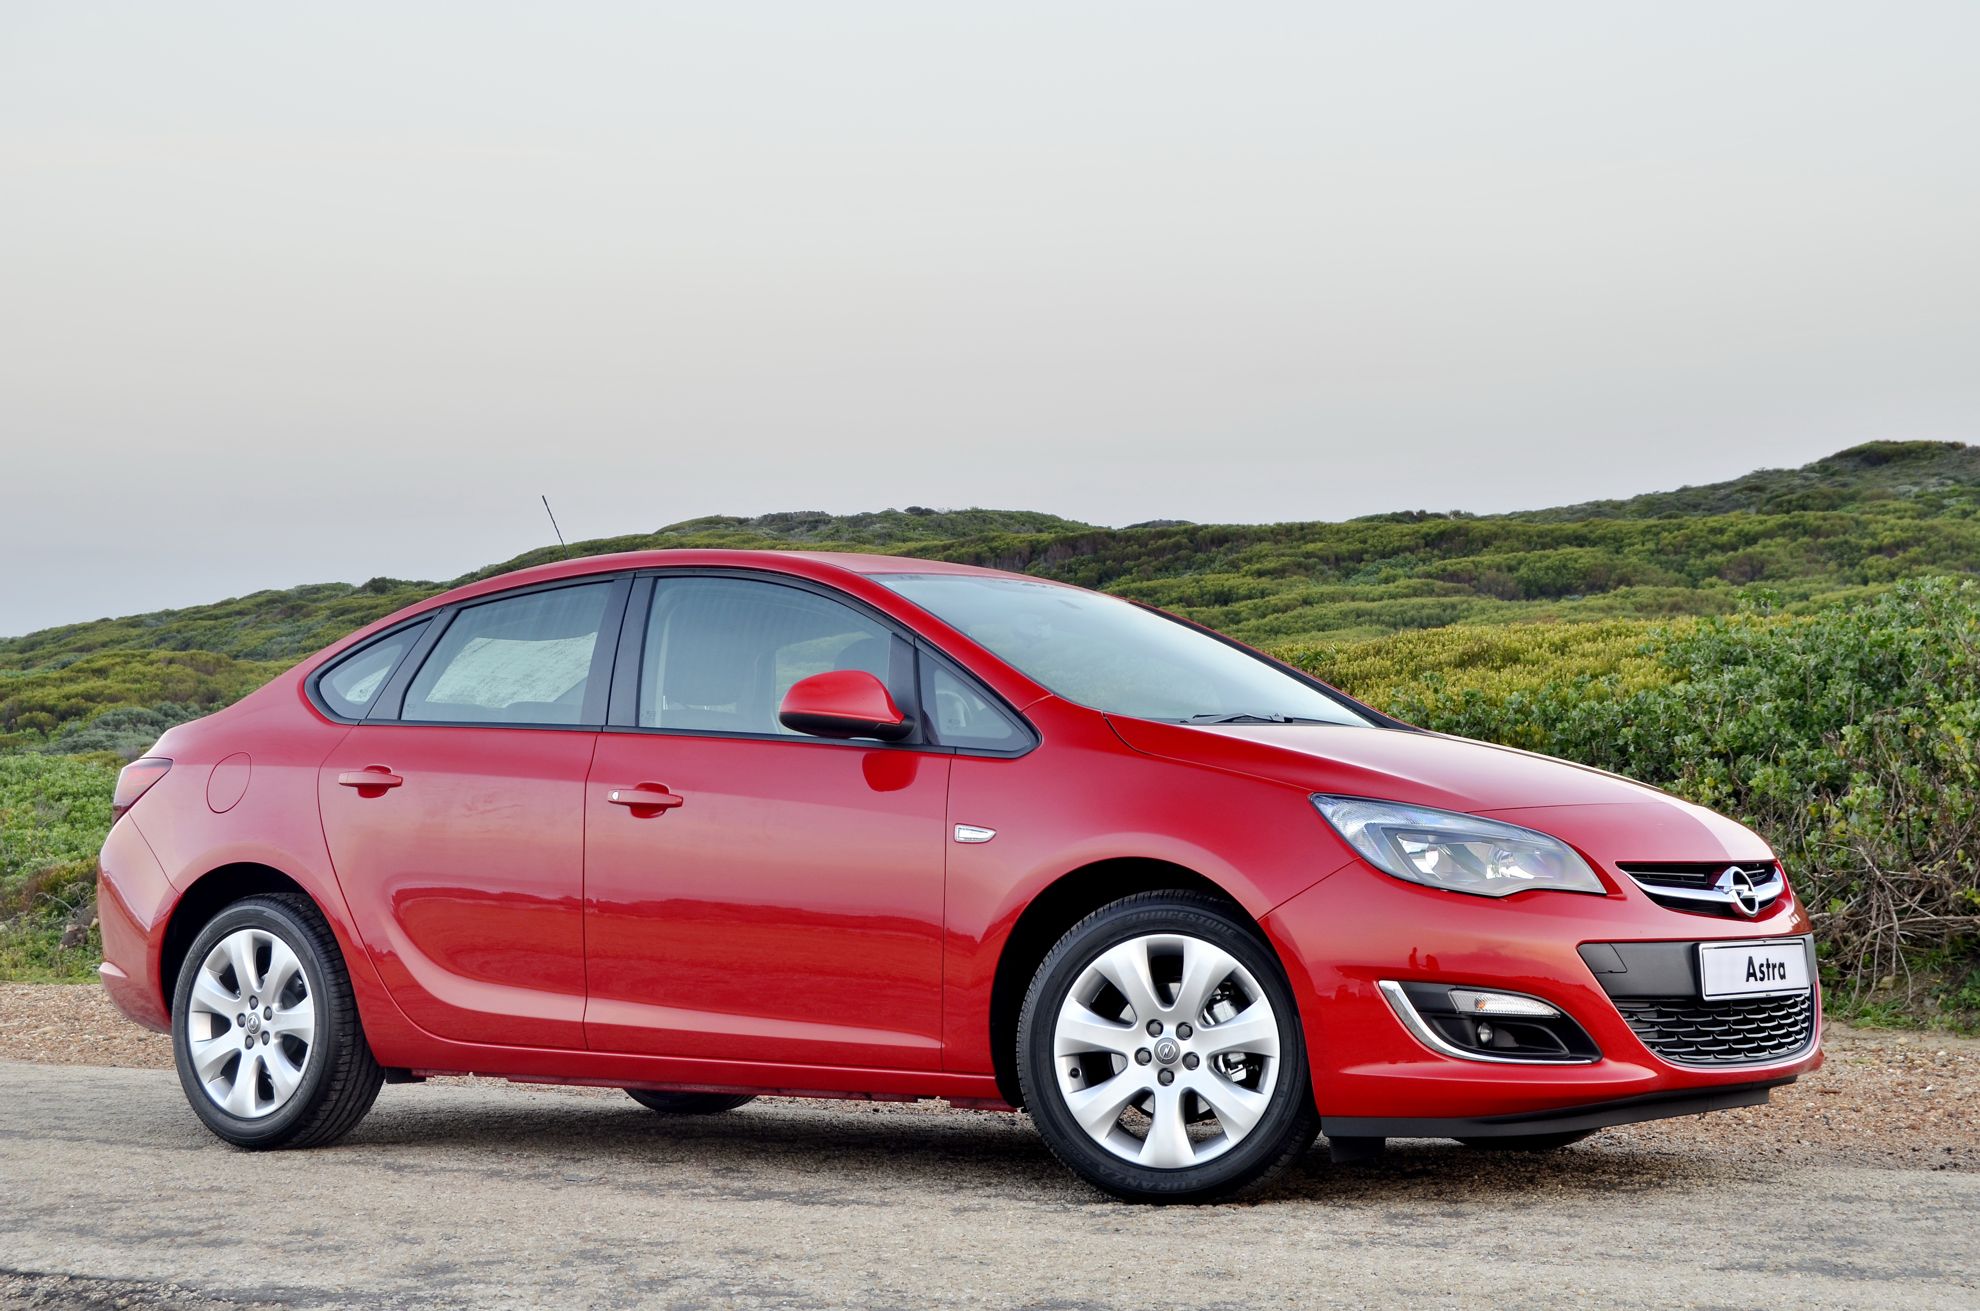 OPEL Car Sales more than 1 Million in 2013